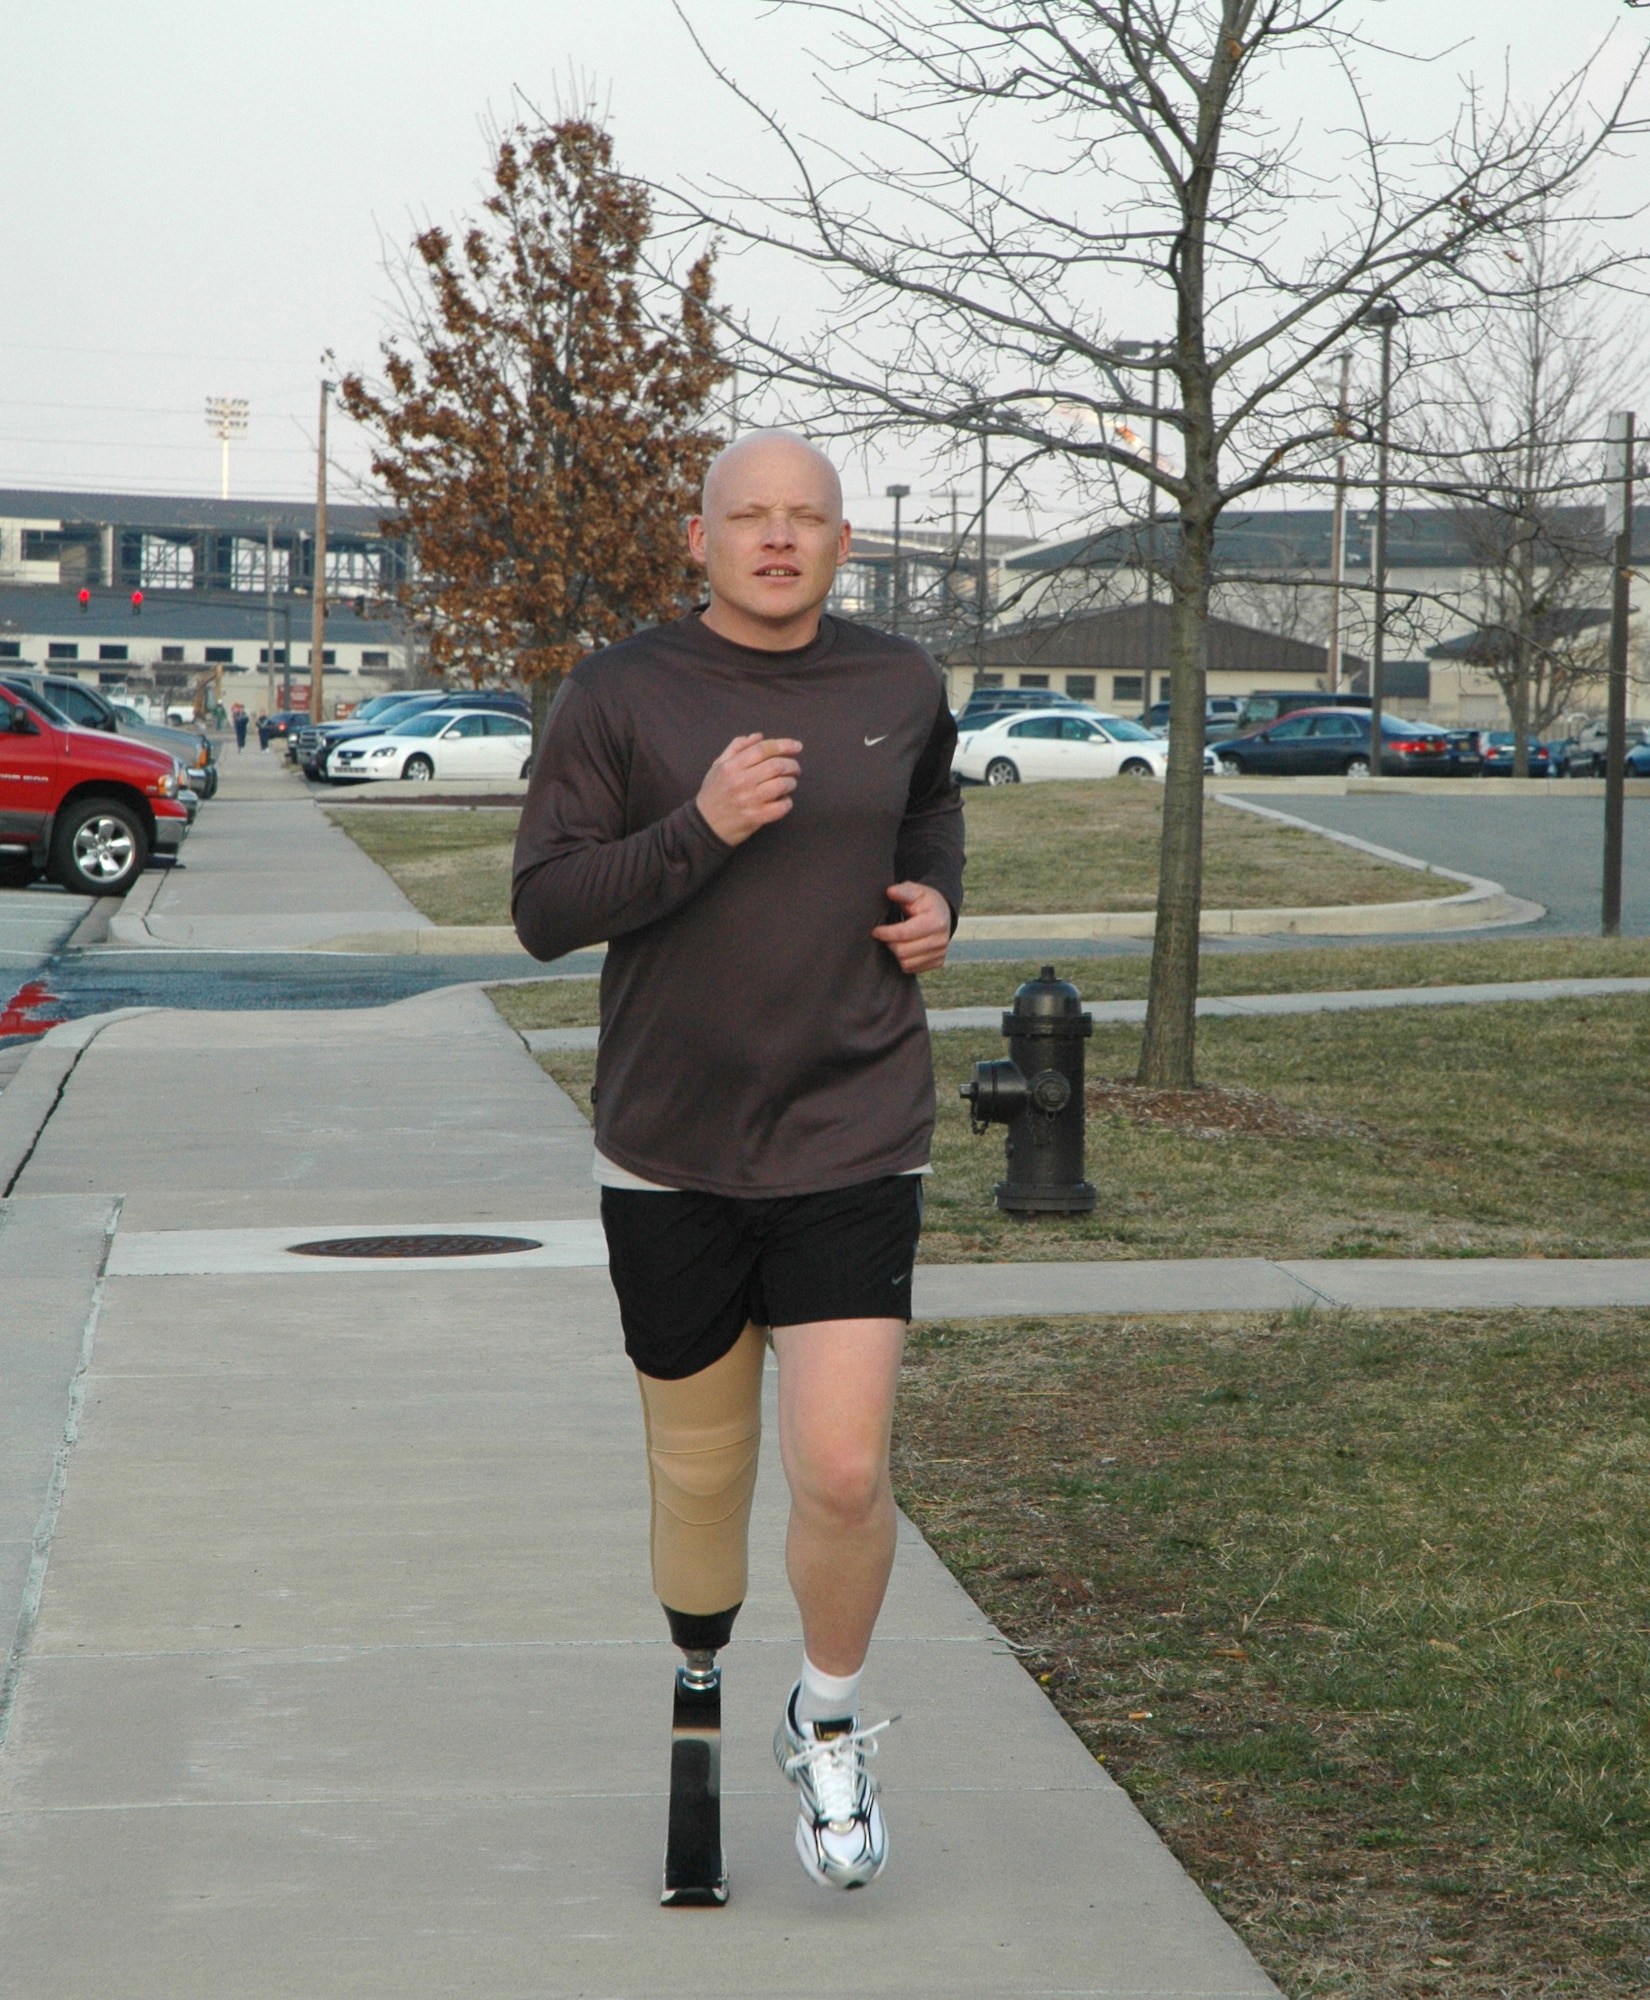 Tech. Sgt. Matthew Profitt runs wearing a flexible prosthesis, a C-Sprint, which absorbs impact. In 2003, while activated at Dover Air Force Base, Del., supporting the war on terrorism, the reservist's leg was amputated when he was diagnosed with epithelioid sarcoma, a malignant soft tissue tumor. He is a 512th Aircraft Maintenance Squadron guidance and control section technician. (U.S. Air Force photo/1st Lt. Marnee A.C. Losurdo)